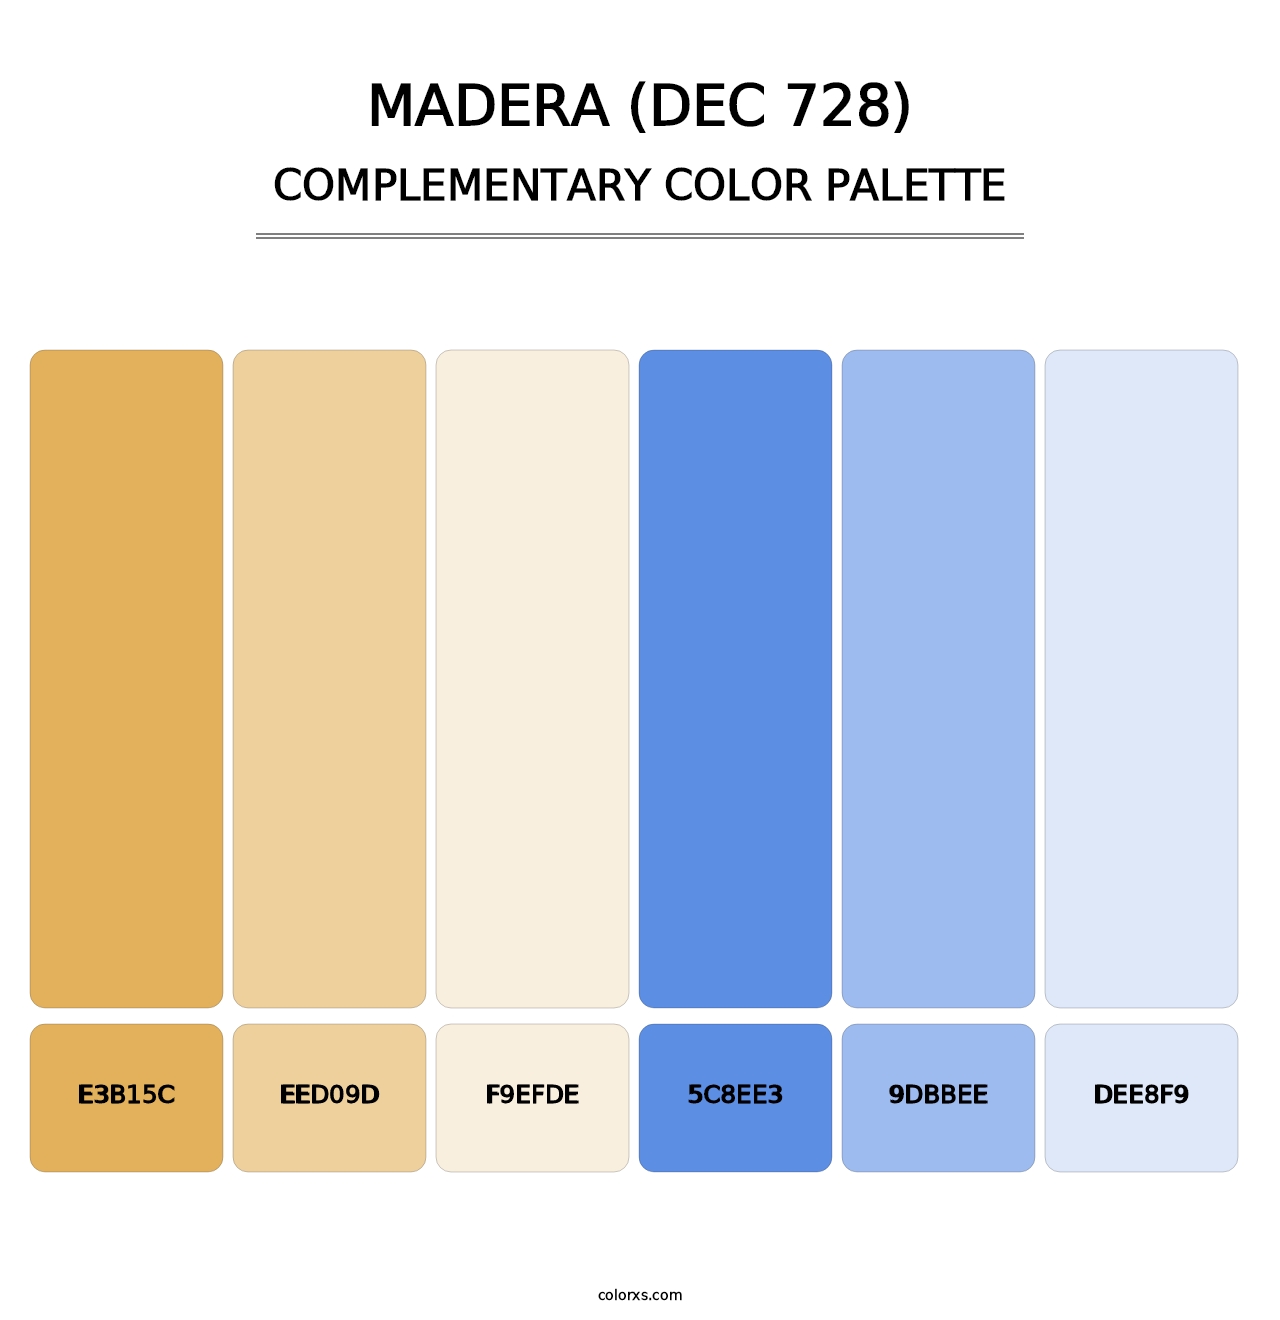 Madera (DEC 728) - Complementary Color Palette